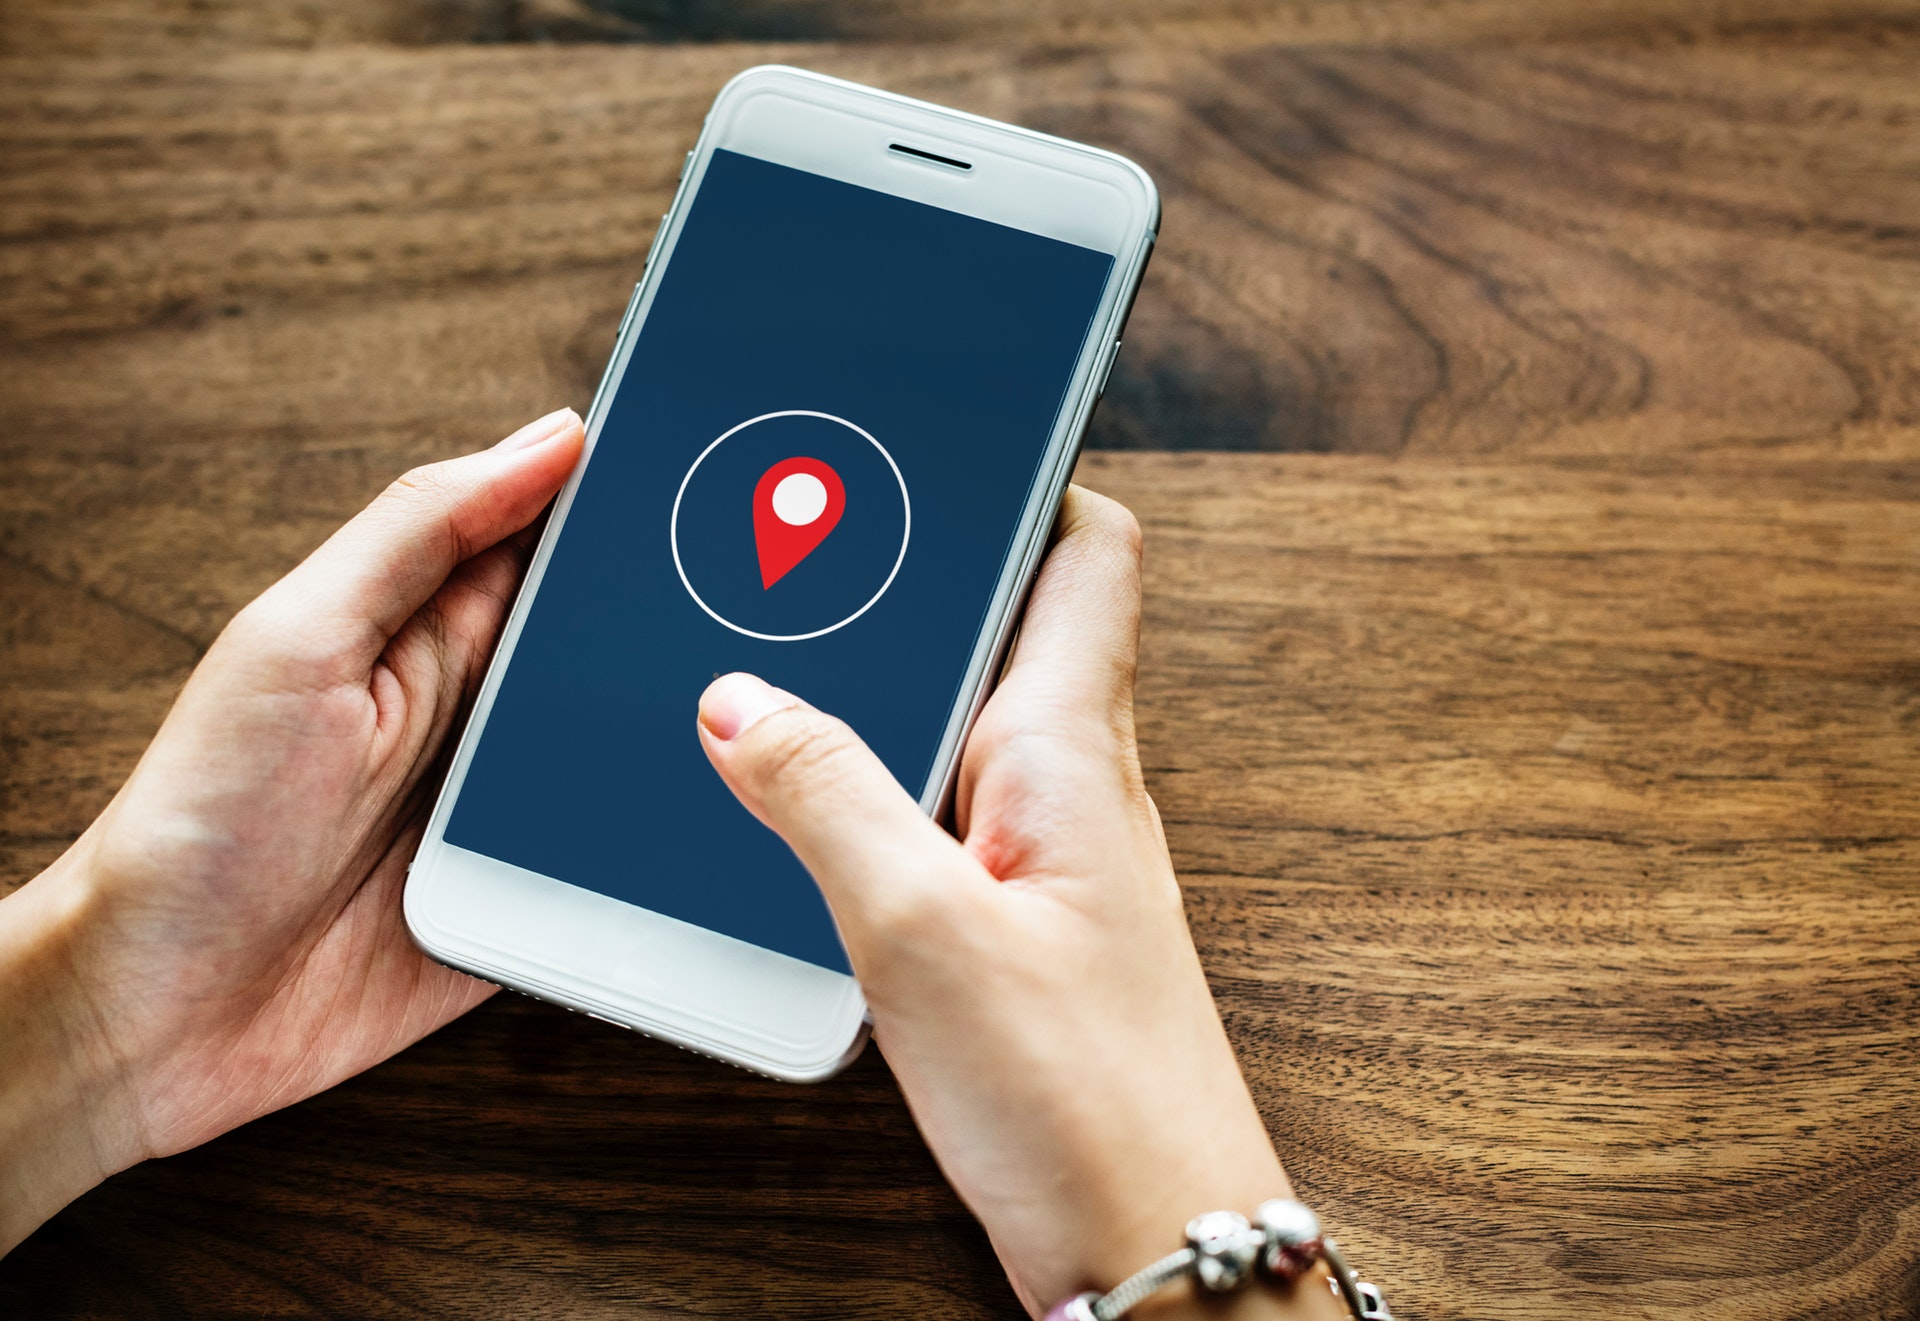 Top 5 Best Phone Tracker Apps Without Permission – Rated and Reviewed